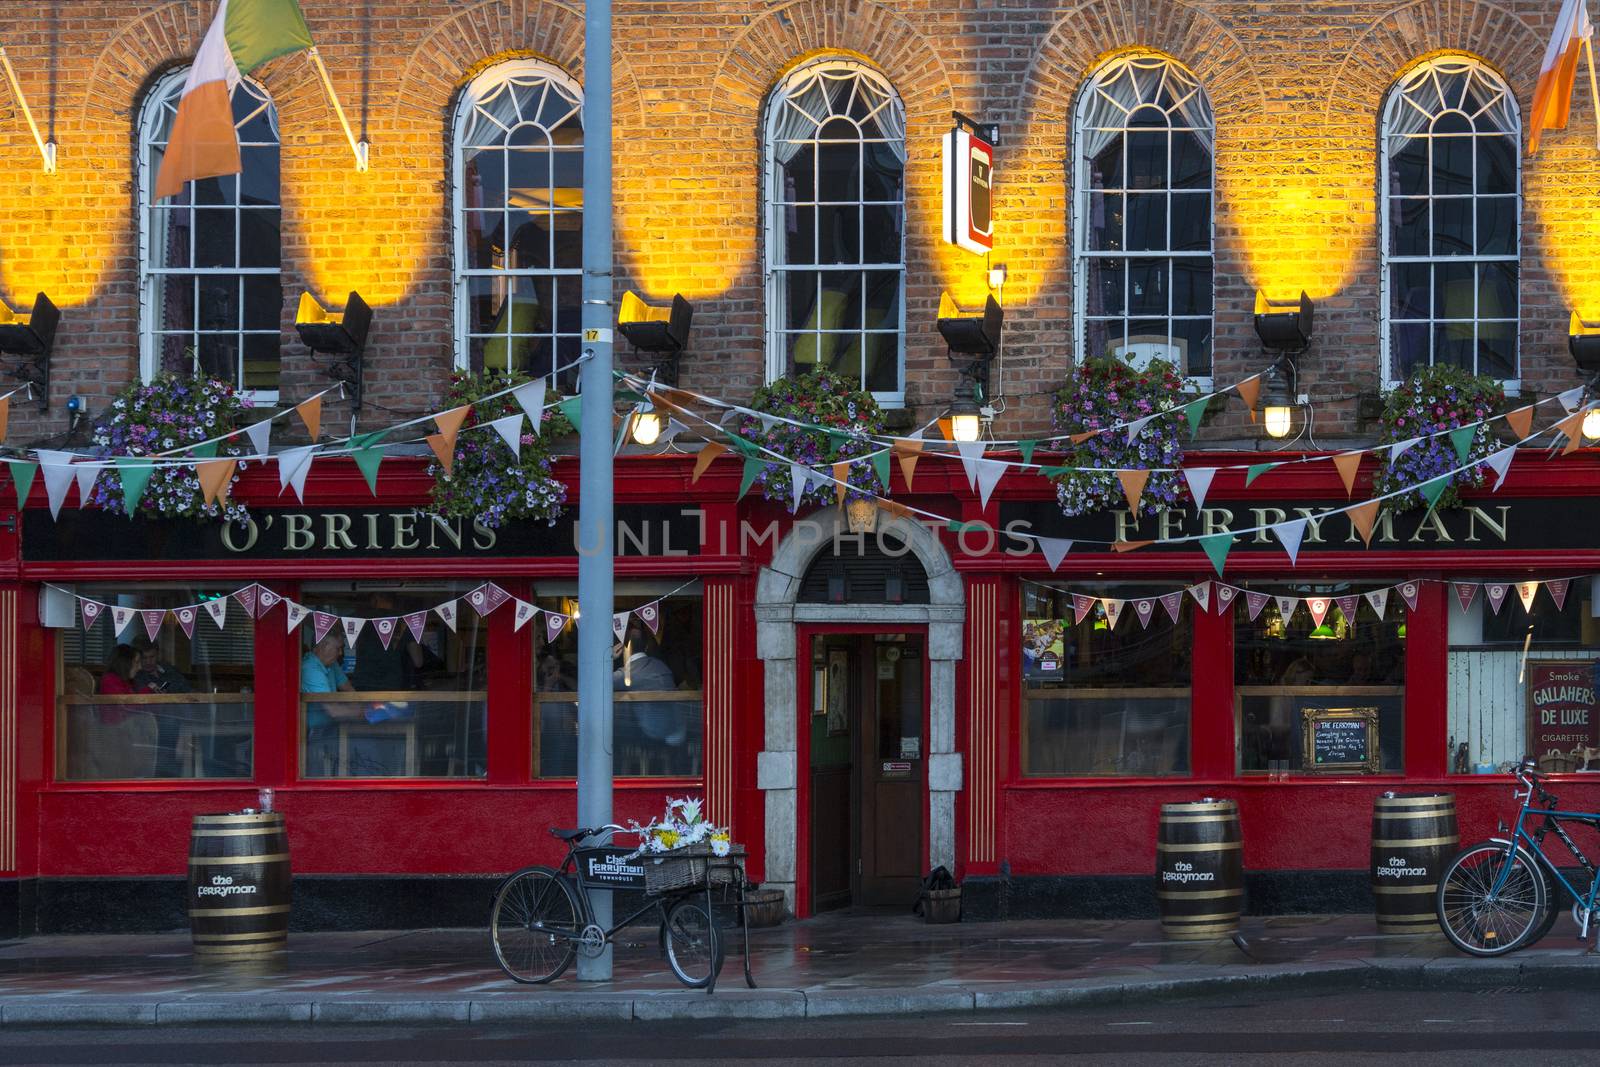 O'Briens public house 'The Ferryman' in the Dockland area of the city of Dublin in the Republic of Ireland.